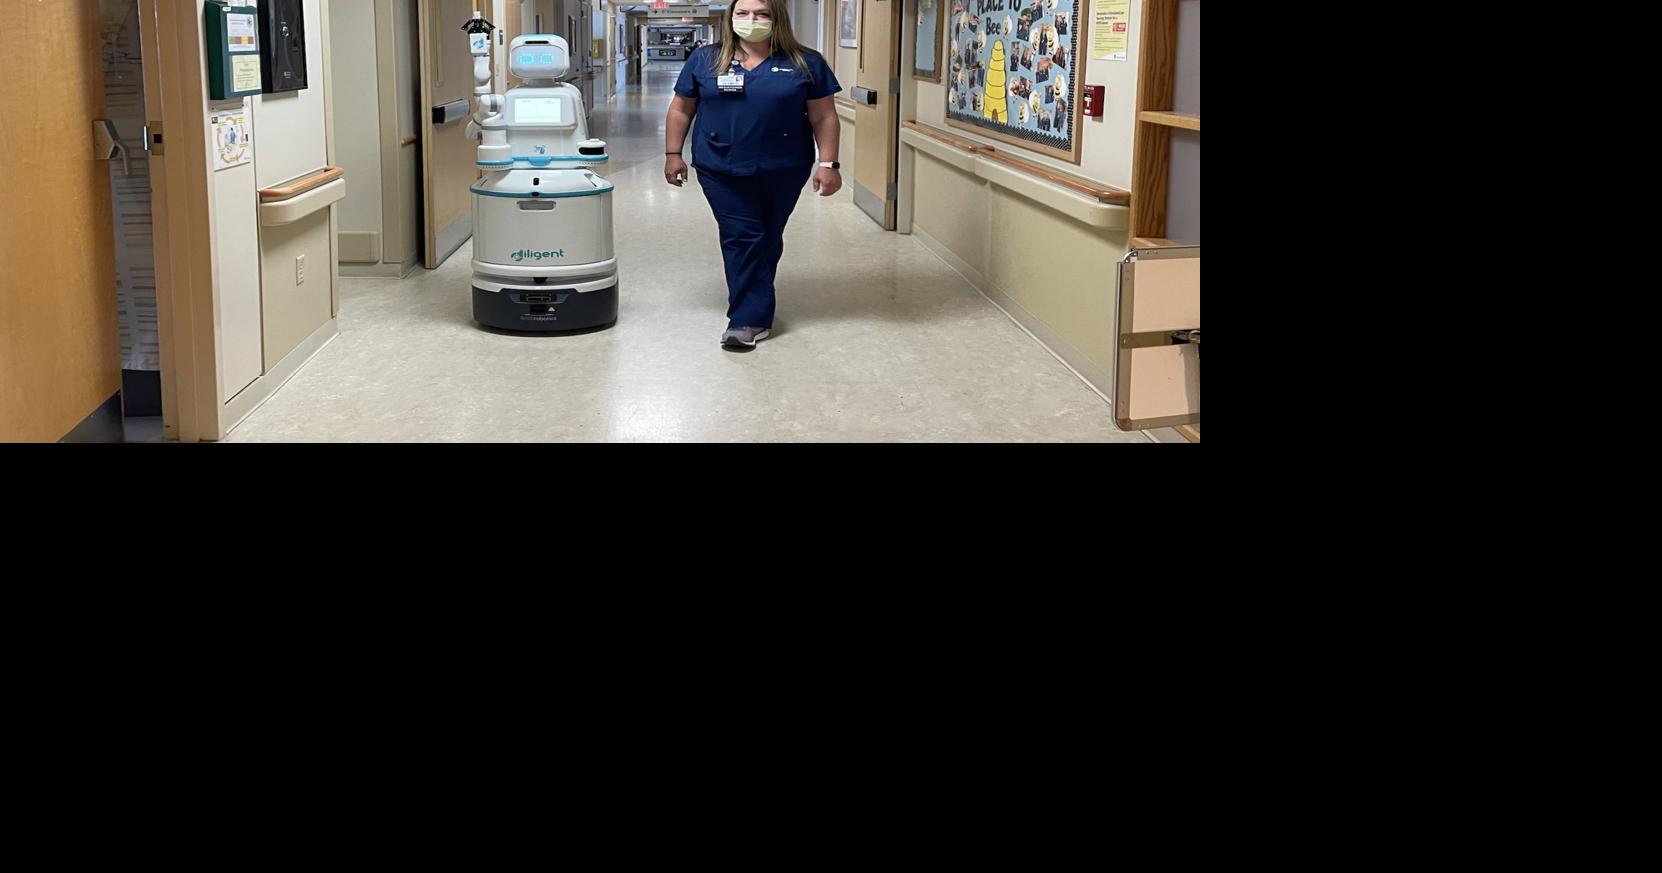 ChristianaCare rolls out 'cobots' to help nurses with nonclinical tasks